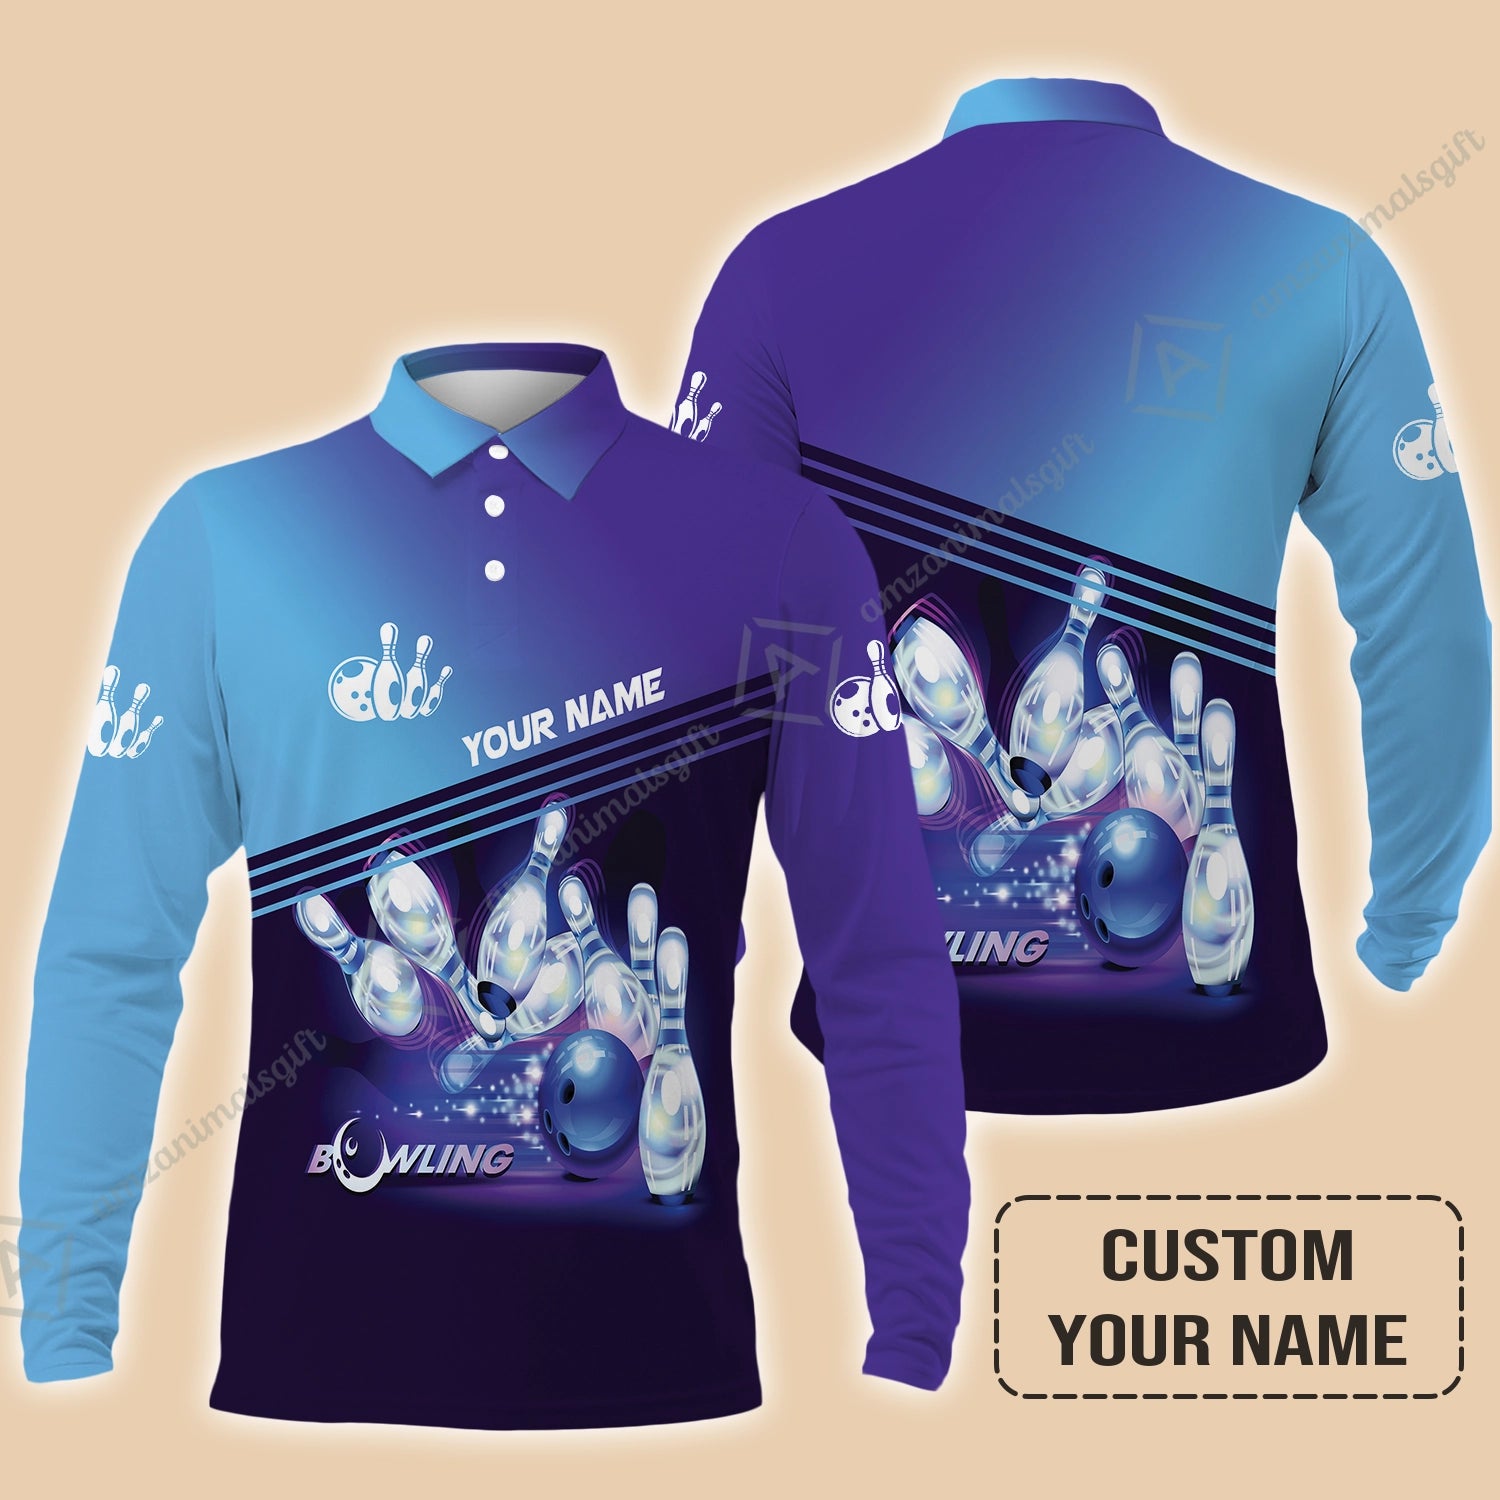 Bowling Long Polo Shirt With Custom Name, Blue Bowling Apparel Uniform Players, Perfect Gifts For Bowling Lovers, Bowlers